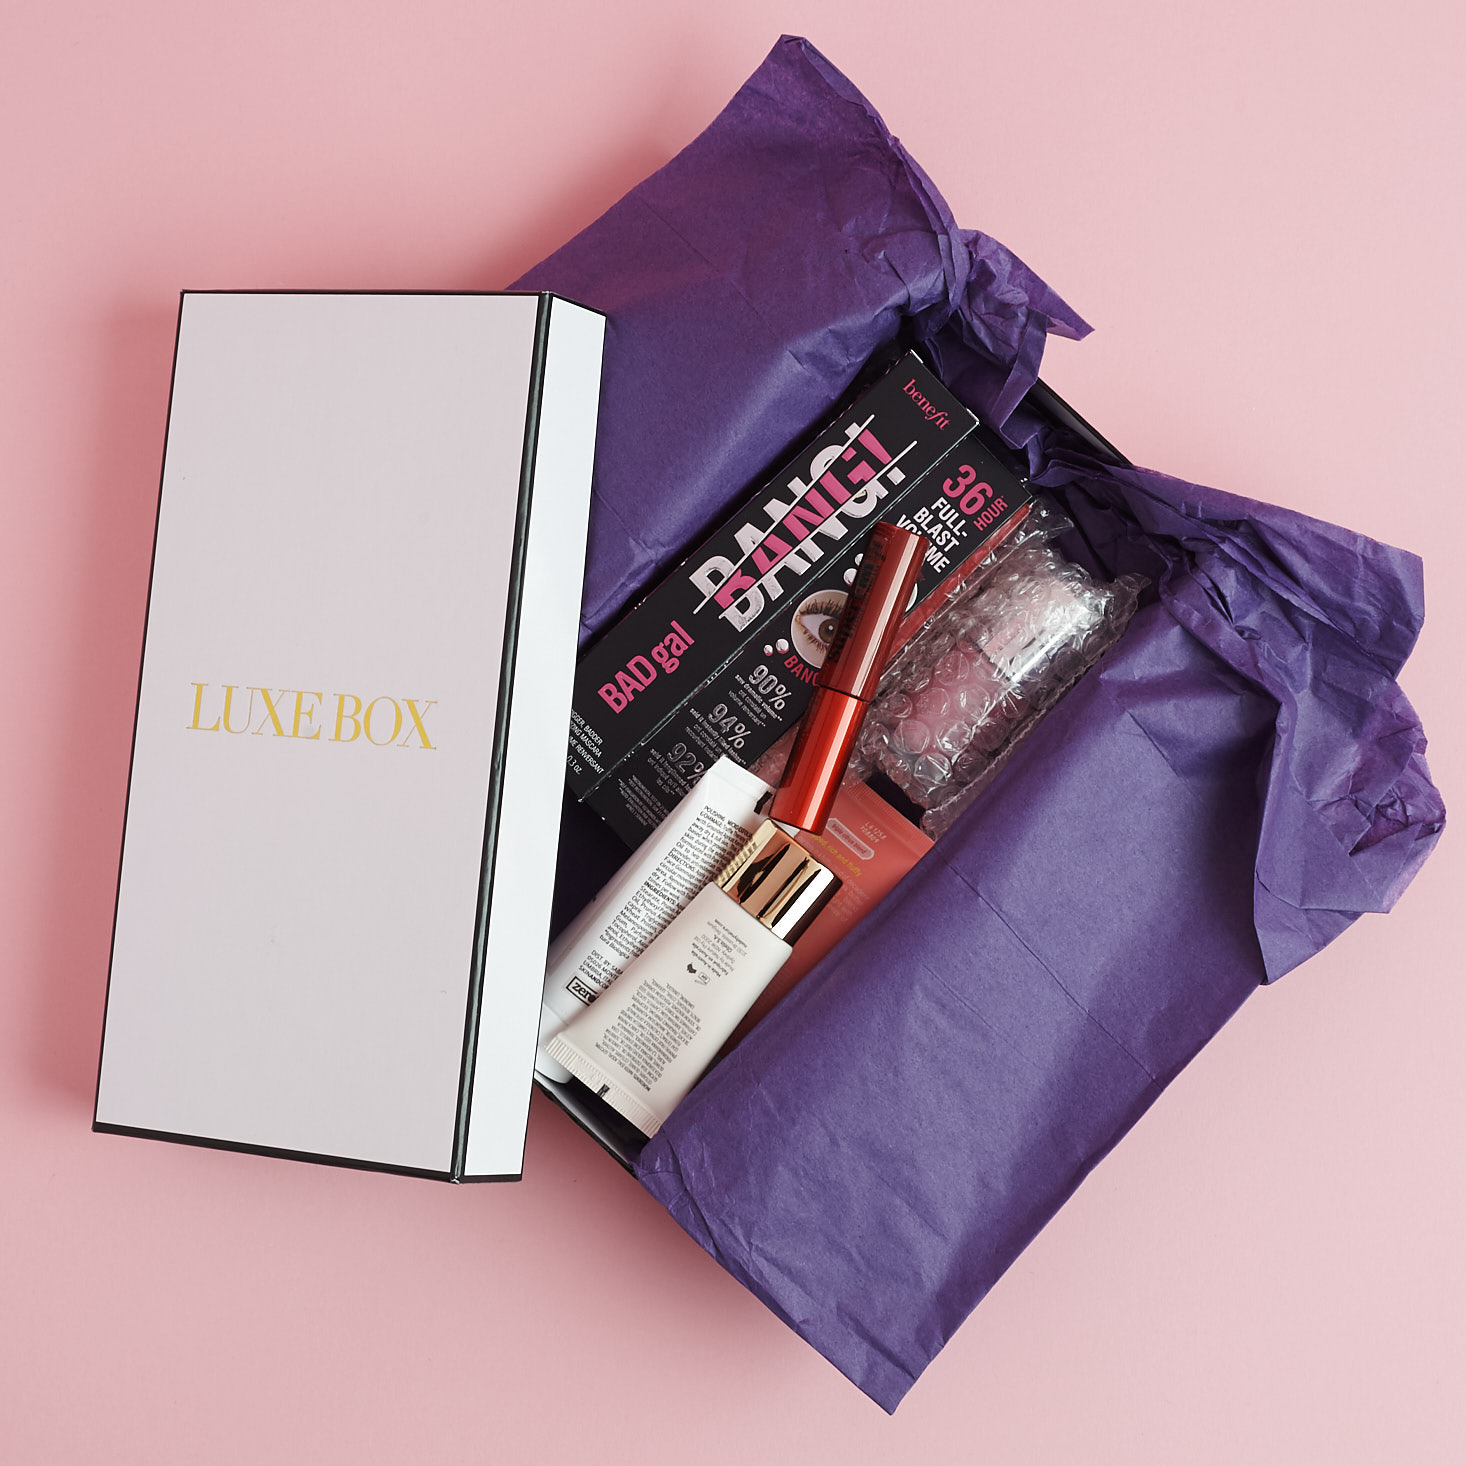 Luxe Box Subscription Box Review – Summer 2018